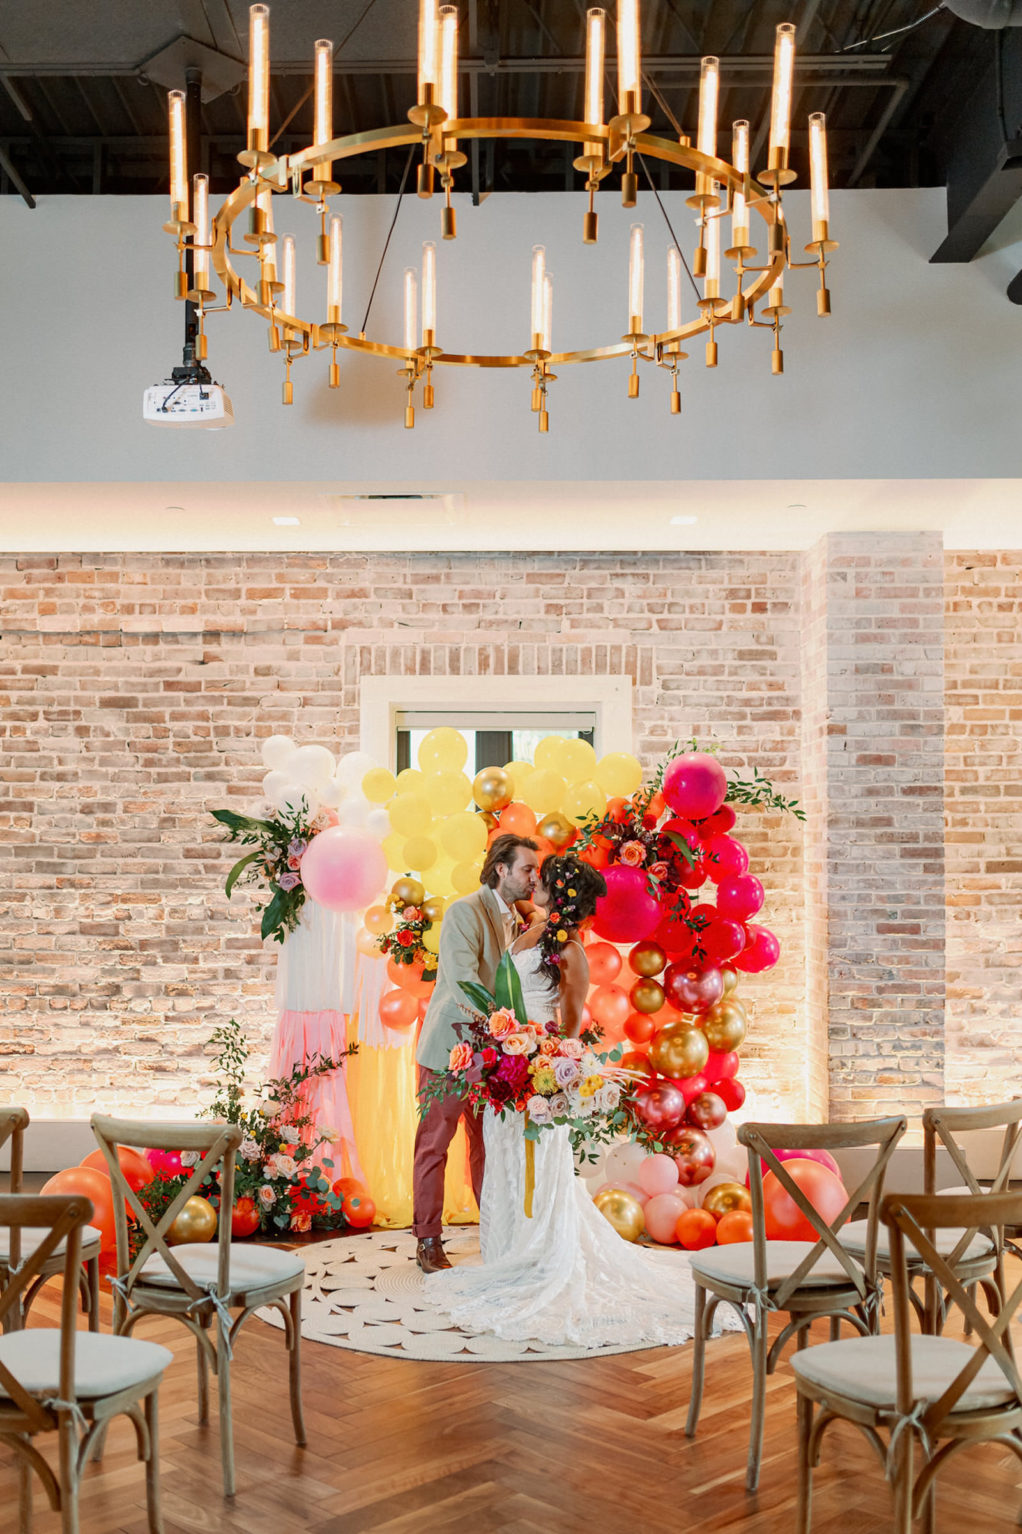 Bride and Groom Exchanging Wedding Vows, Whimsical and Colorful Wedding Decor, Yellow, Pink, Orange, White, Gold Fringe and Balloon Ceremony Backdrop, Wooden Cross Back Chairs, Gold and Candlestick Chandelier, White Brick Wall | Tampa Bay Wedding Photographer Dewitt for Love | St. Pete Modern Industrial Wedding Venue Red Mesa Events | Wedding Chair Rentals Kate Ryan Event Rentals